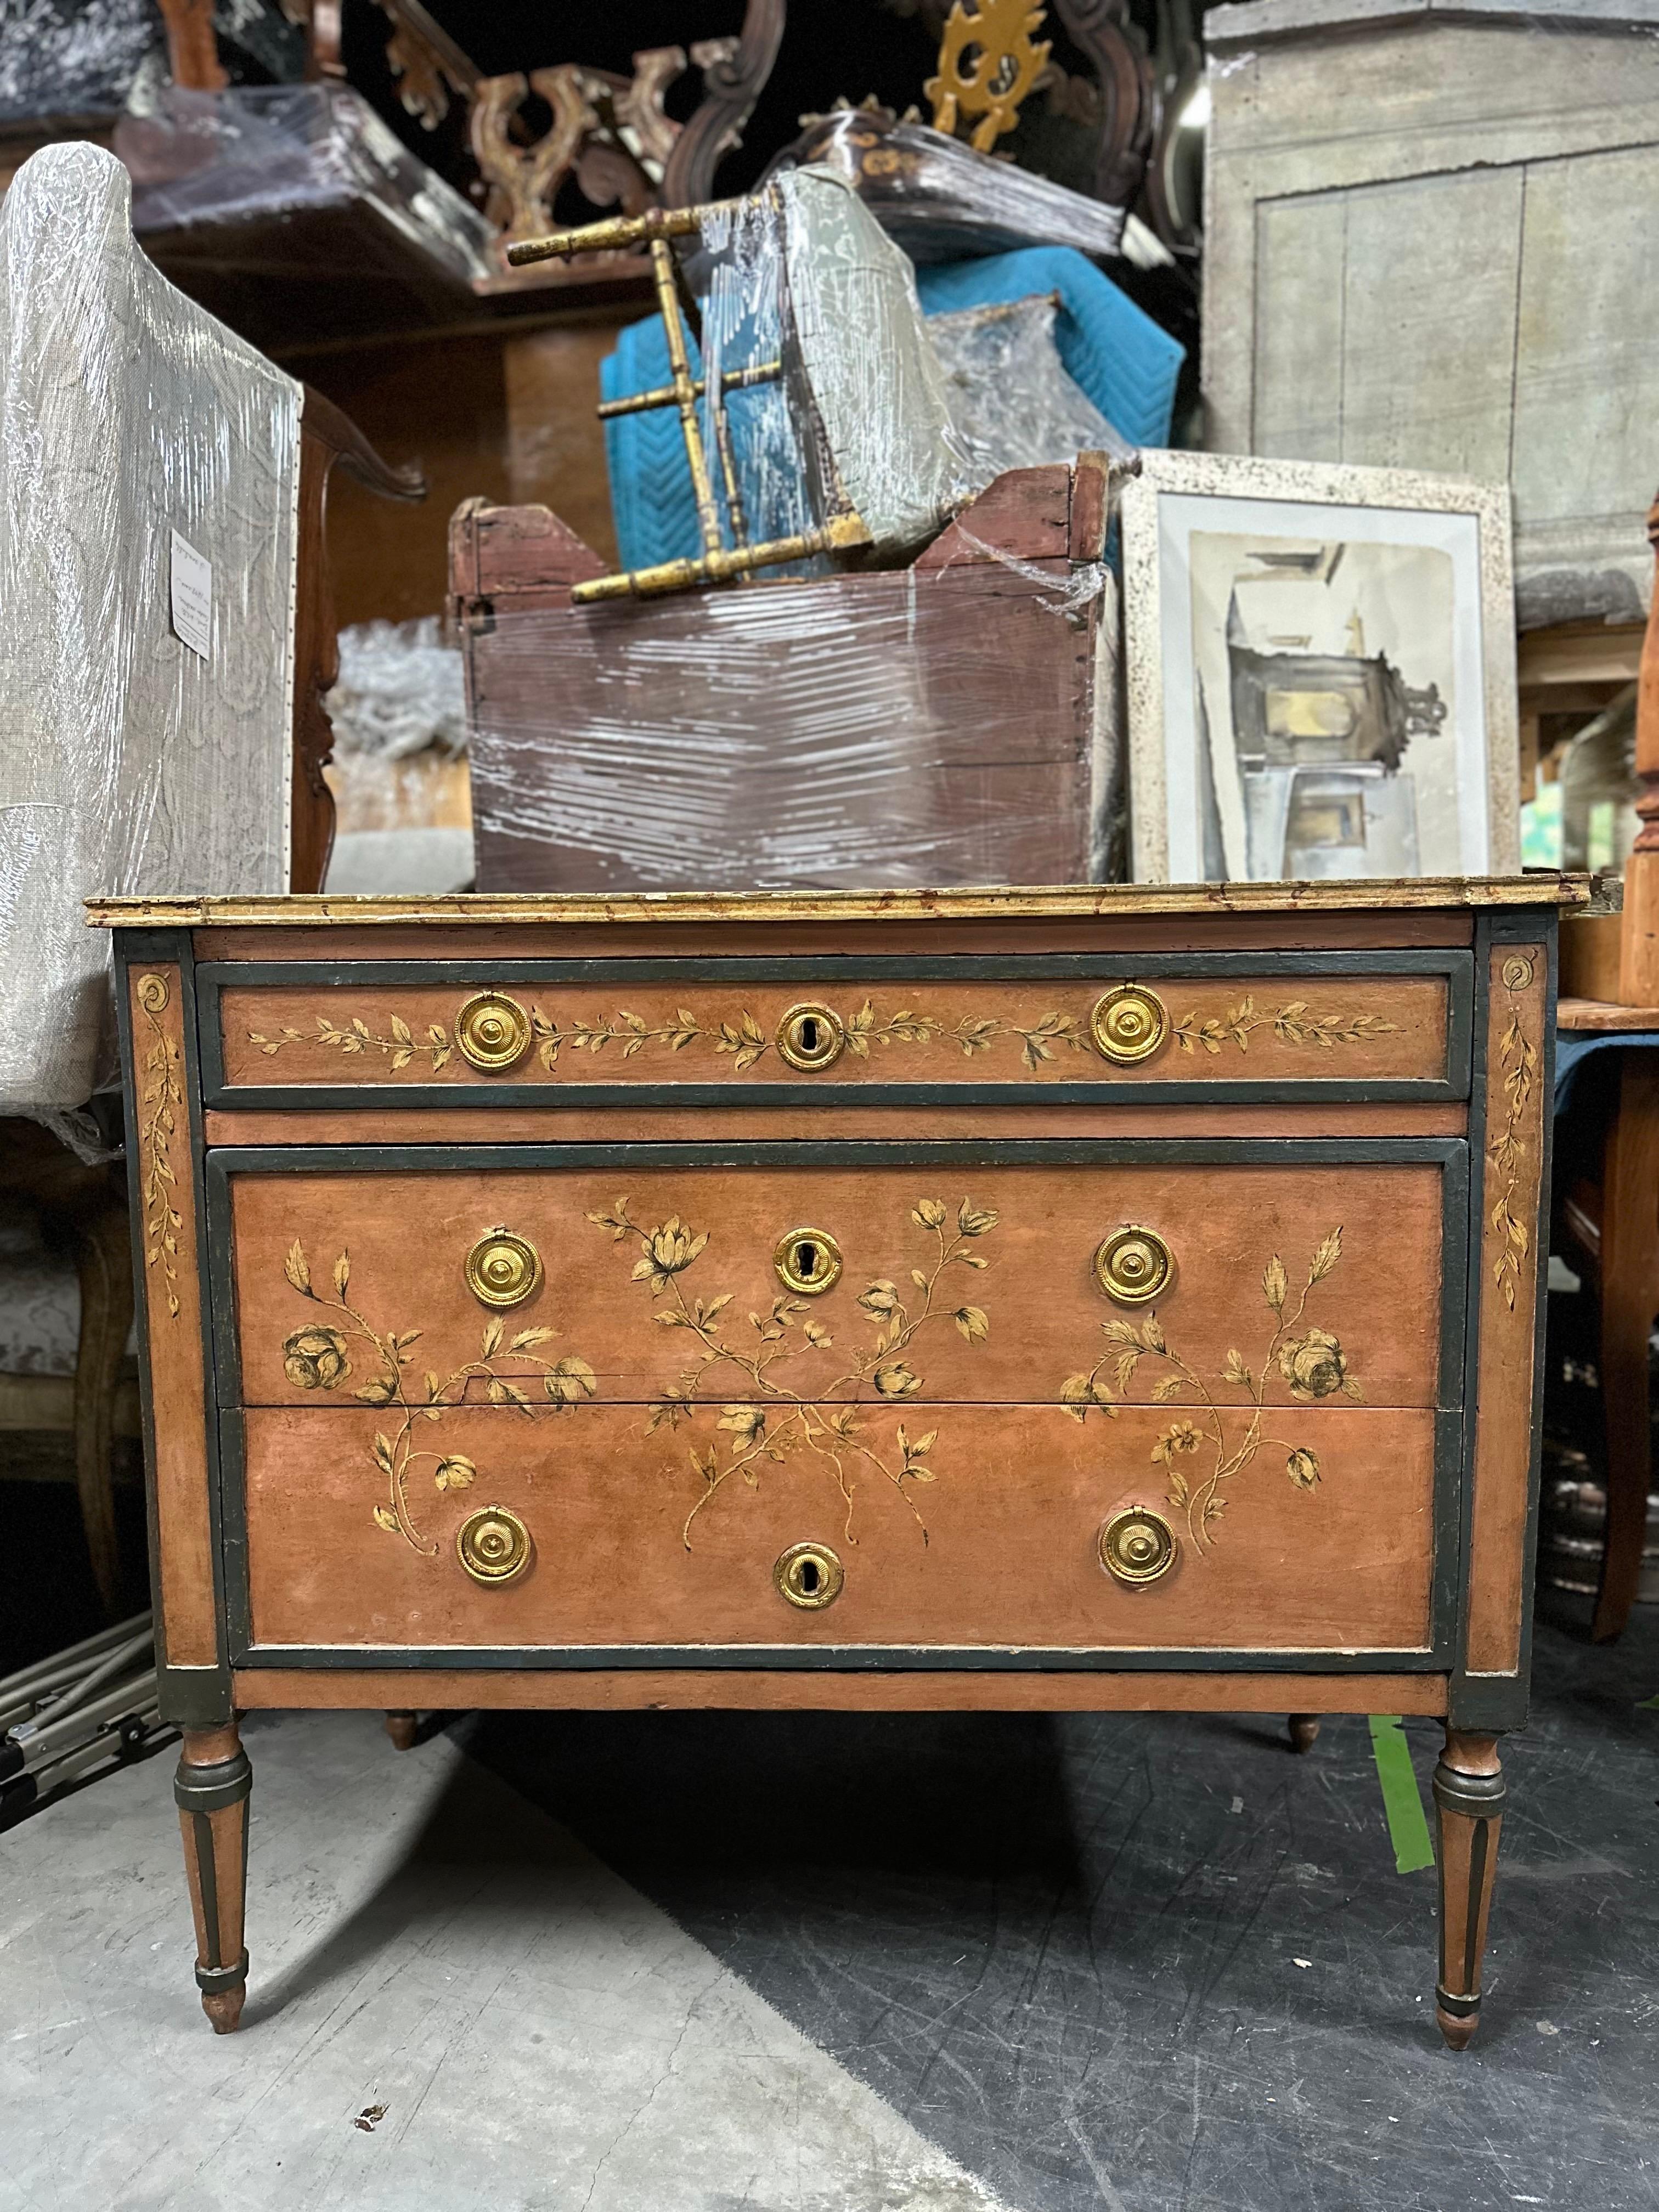 This Early 20th Century Painted Italian Neoclassical Style Three-Drawer Commode is a true testament to the enduring beauty of Neoclassical design. Crafted with meticulous attention to detail, it boasts a graceful and timeless elegance. The turned